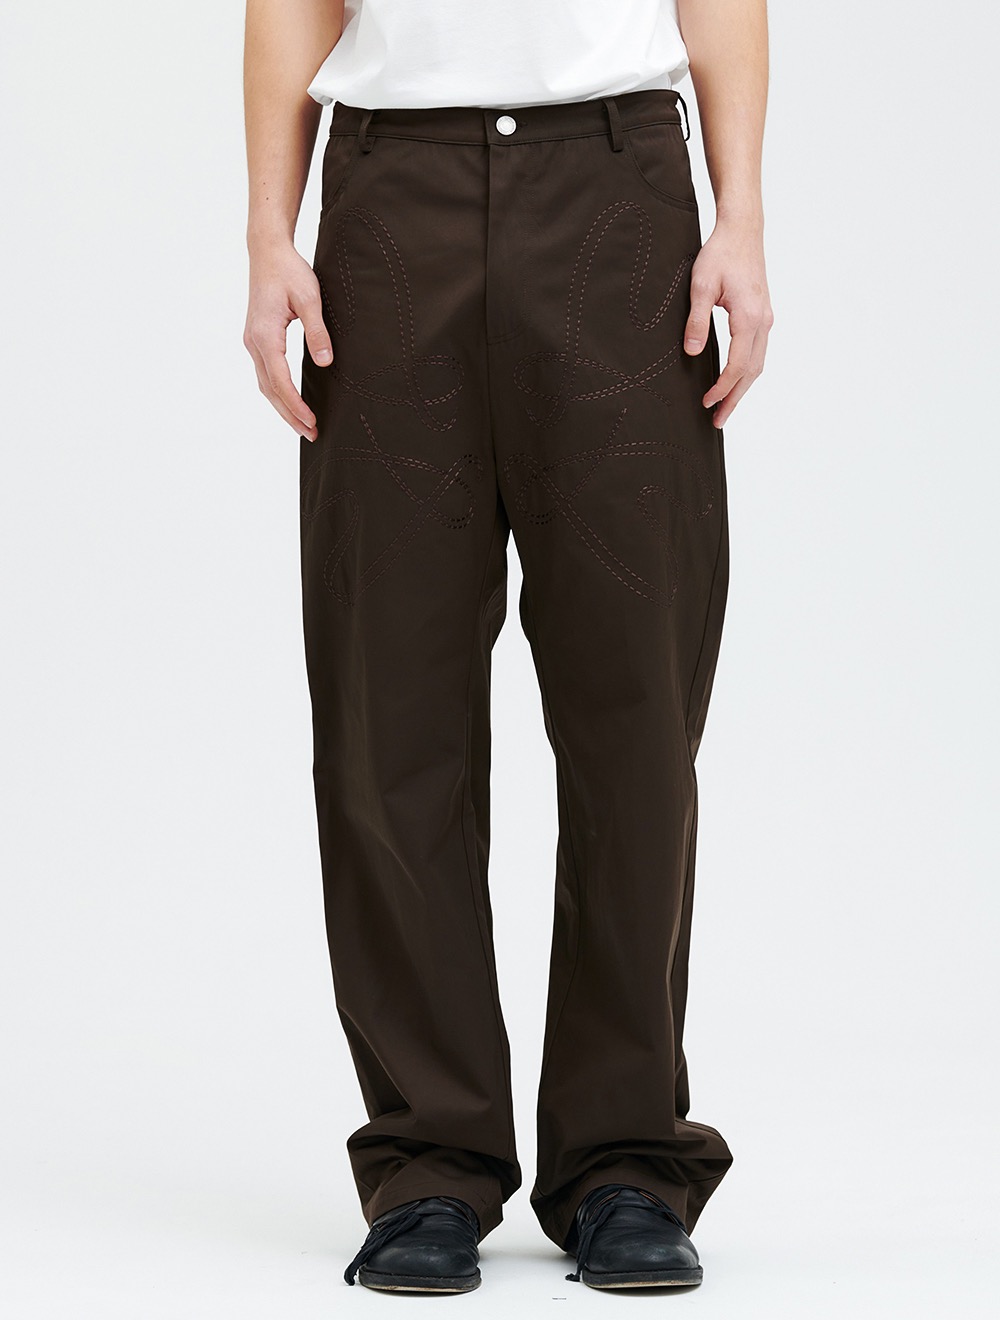 Pansy Lettering Pants-Brown